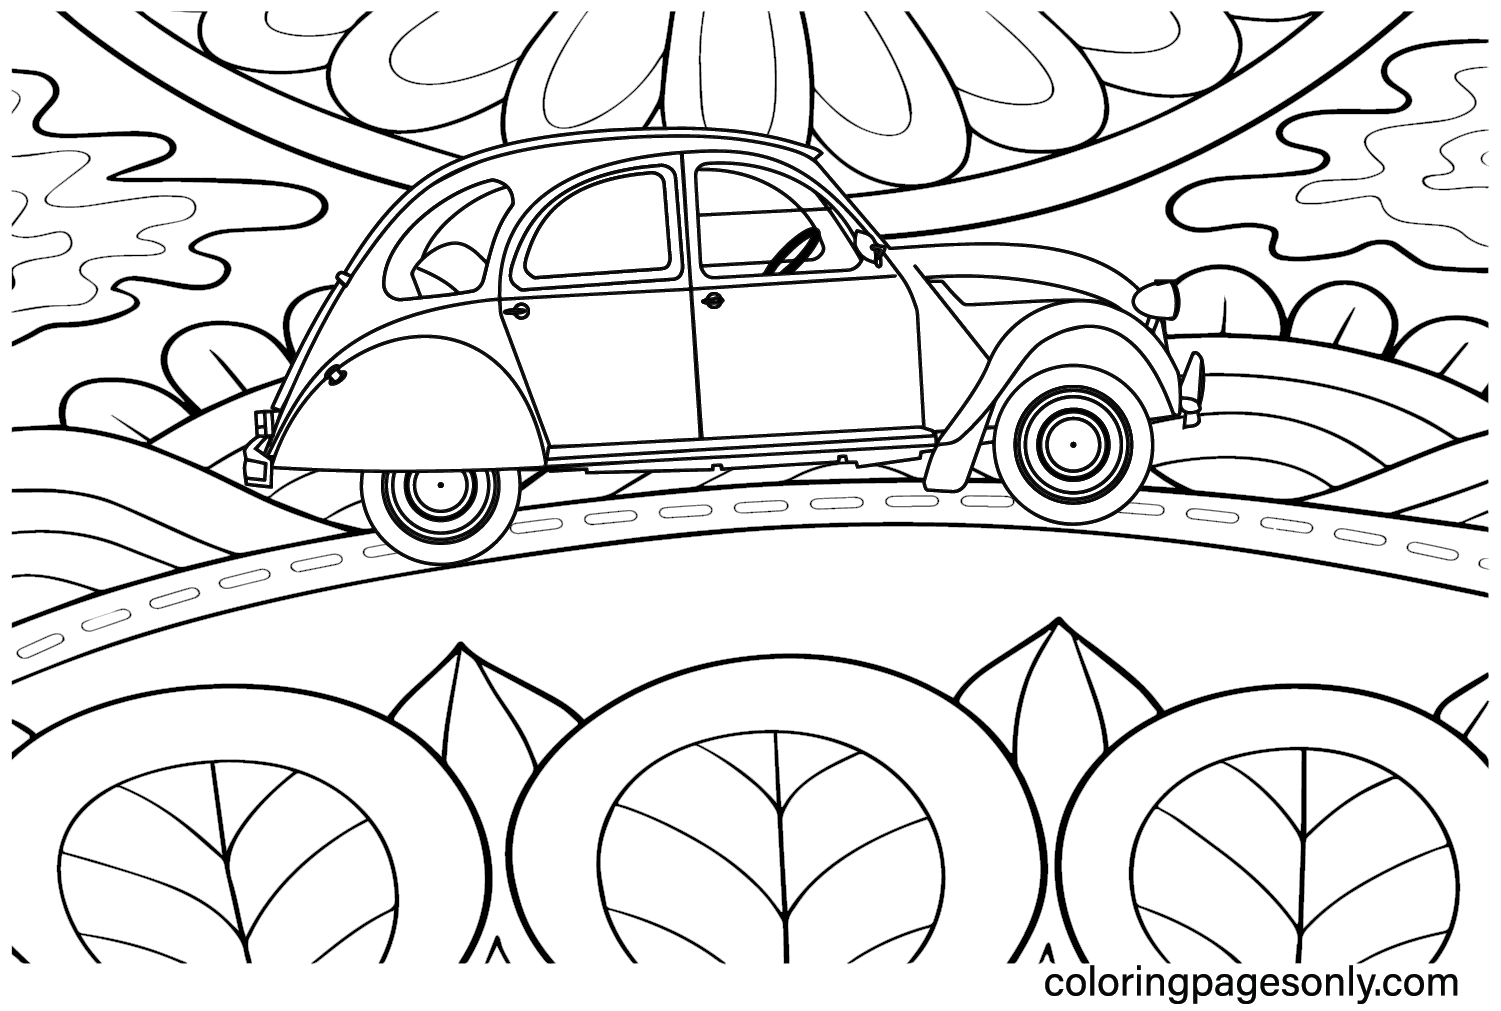 Old Citroen Coloring Page from Citroën